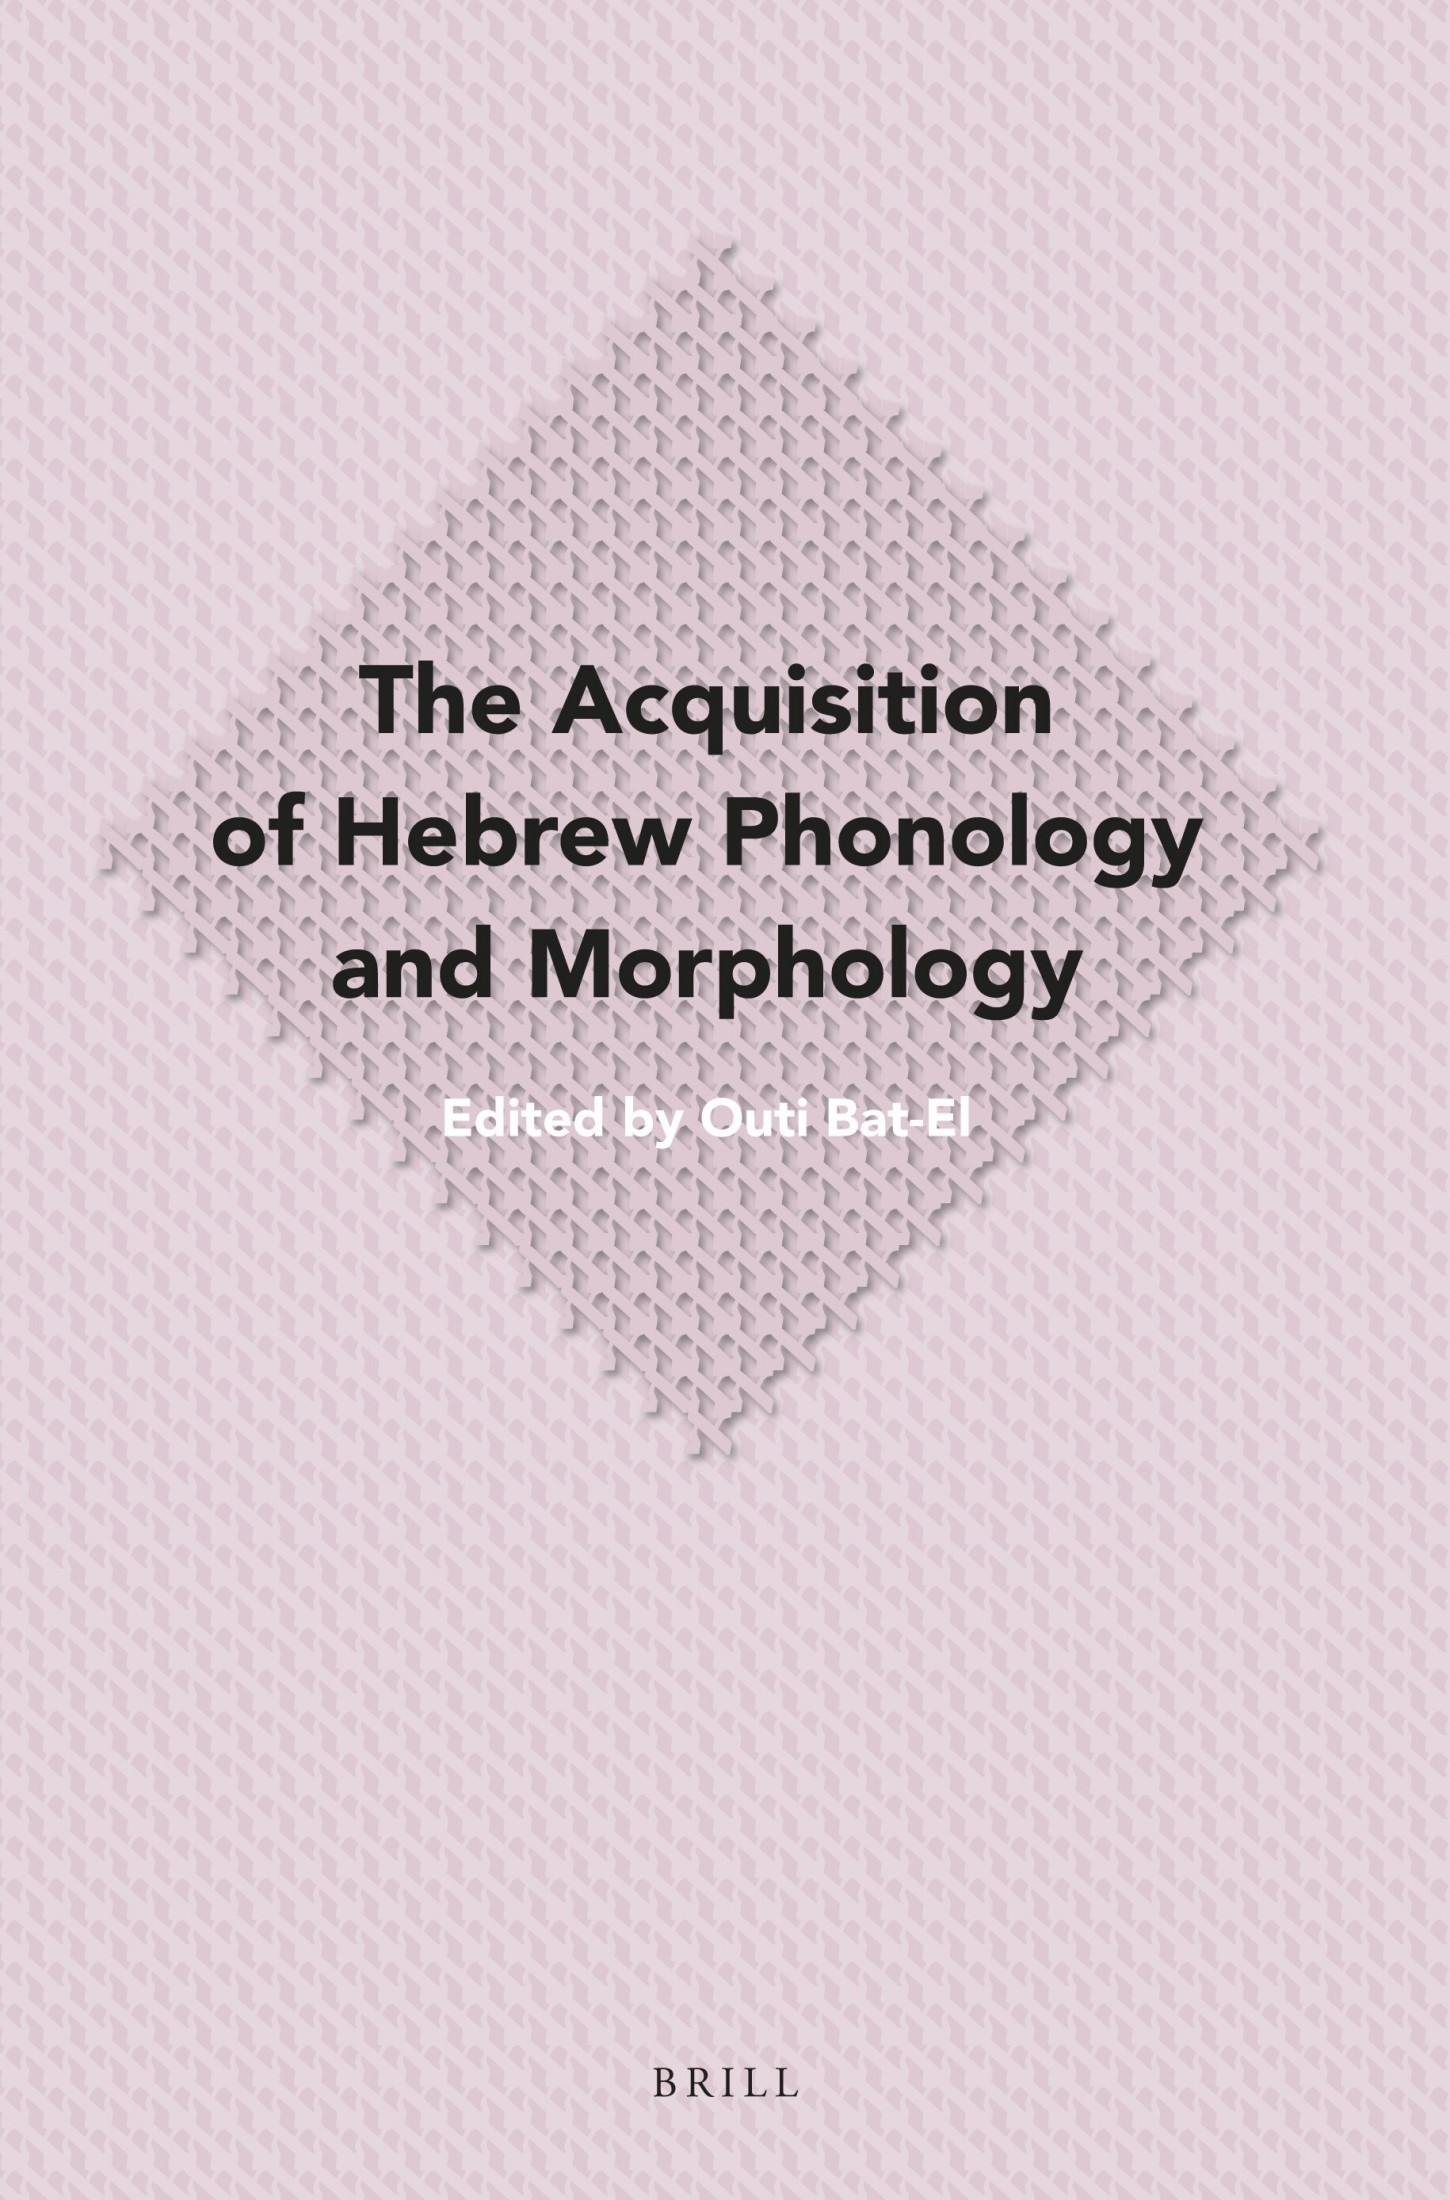 The Acquisition of Hebrew Phonology and Morphology